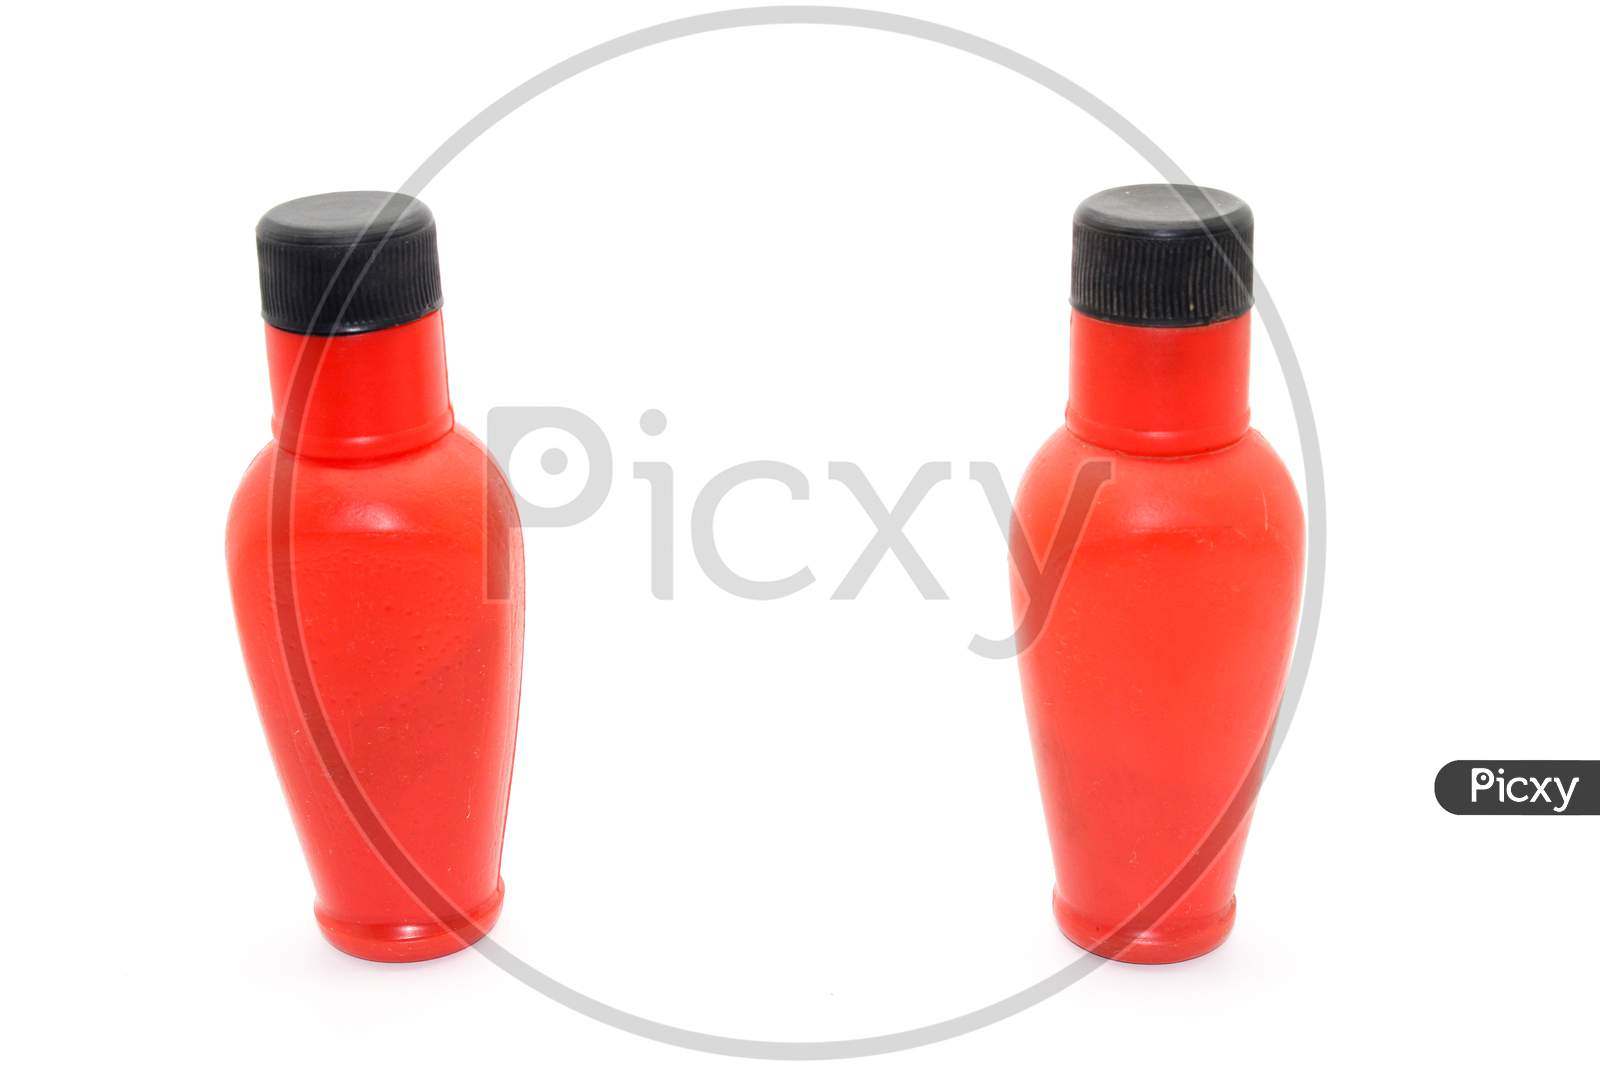 A Picture Of Bottles On White Background